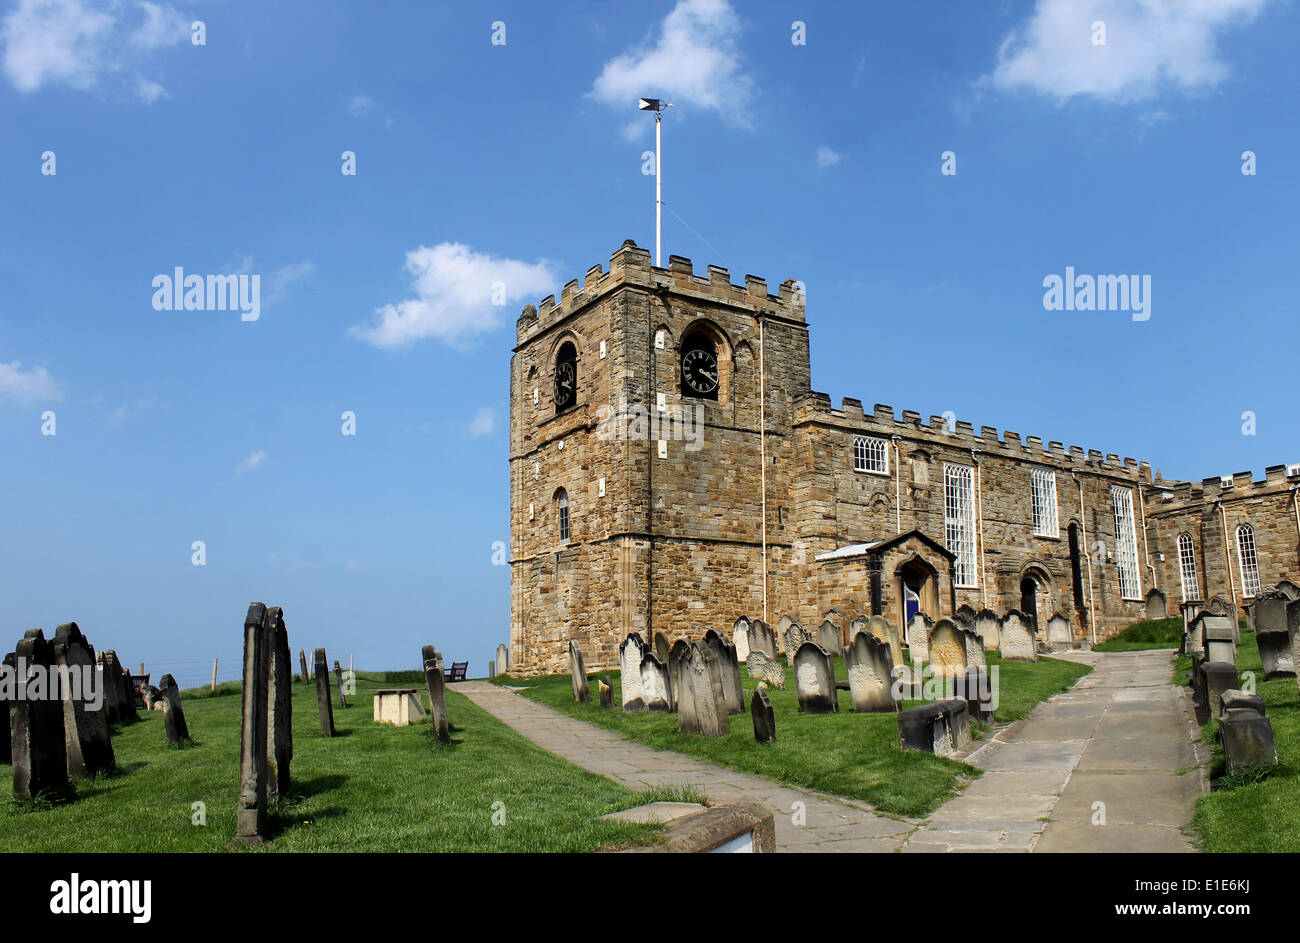 Scenic view of St. Marys church and graveyard in Whitby, North Yorkshire, England. Stock Photo